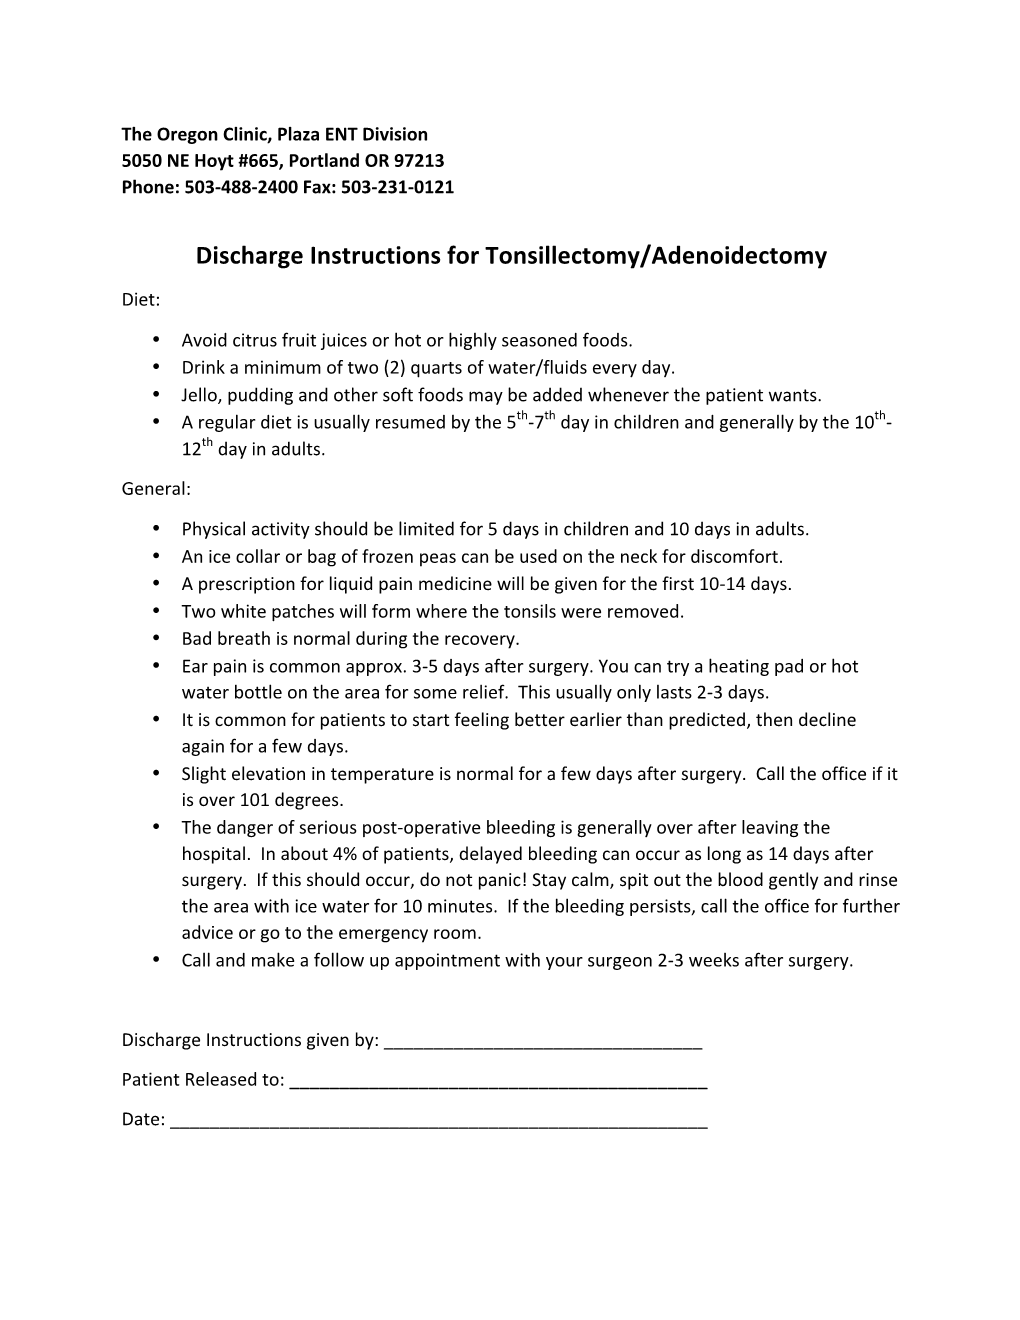 Discharge Instructions for Tonsillectomy/Adenoidectomy